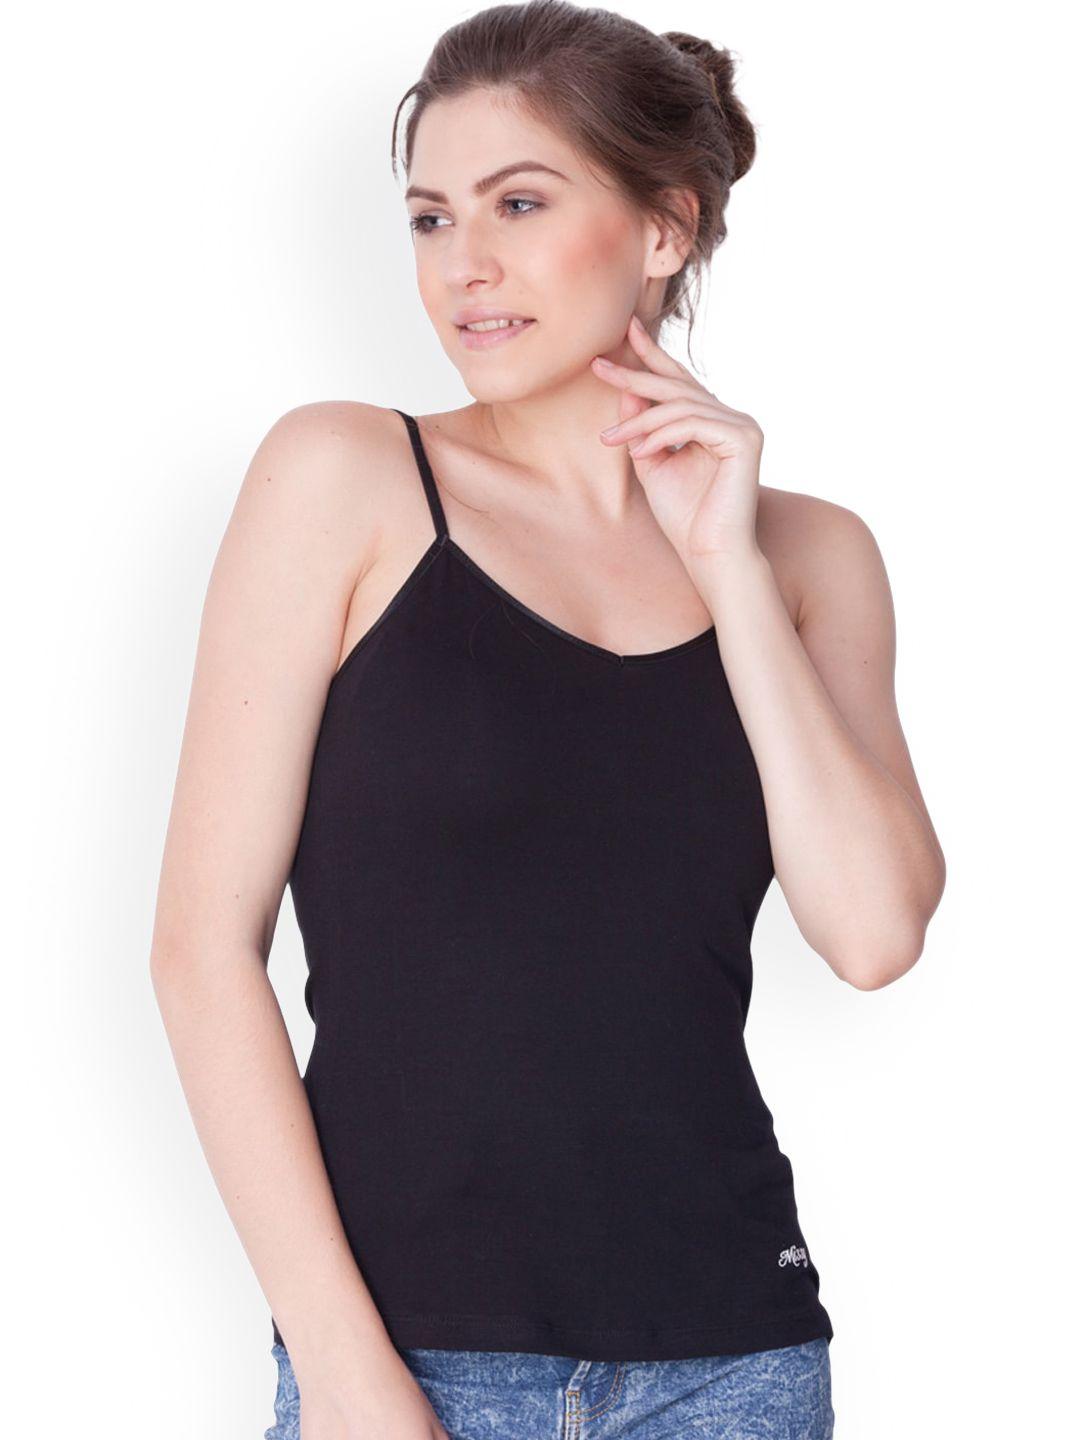 dollar-missy-women-black-pack-of-2-solid-cotton-camisole